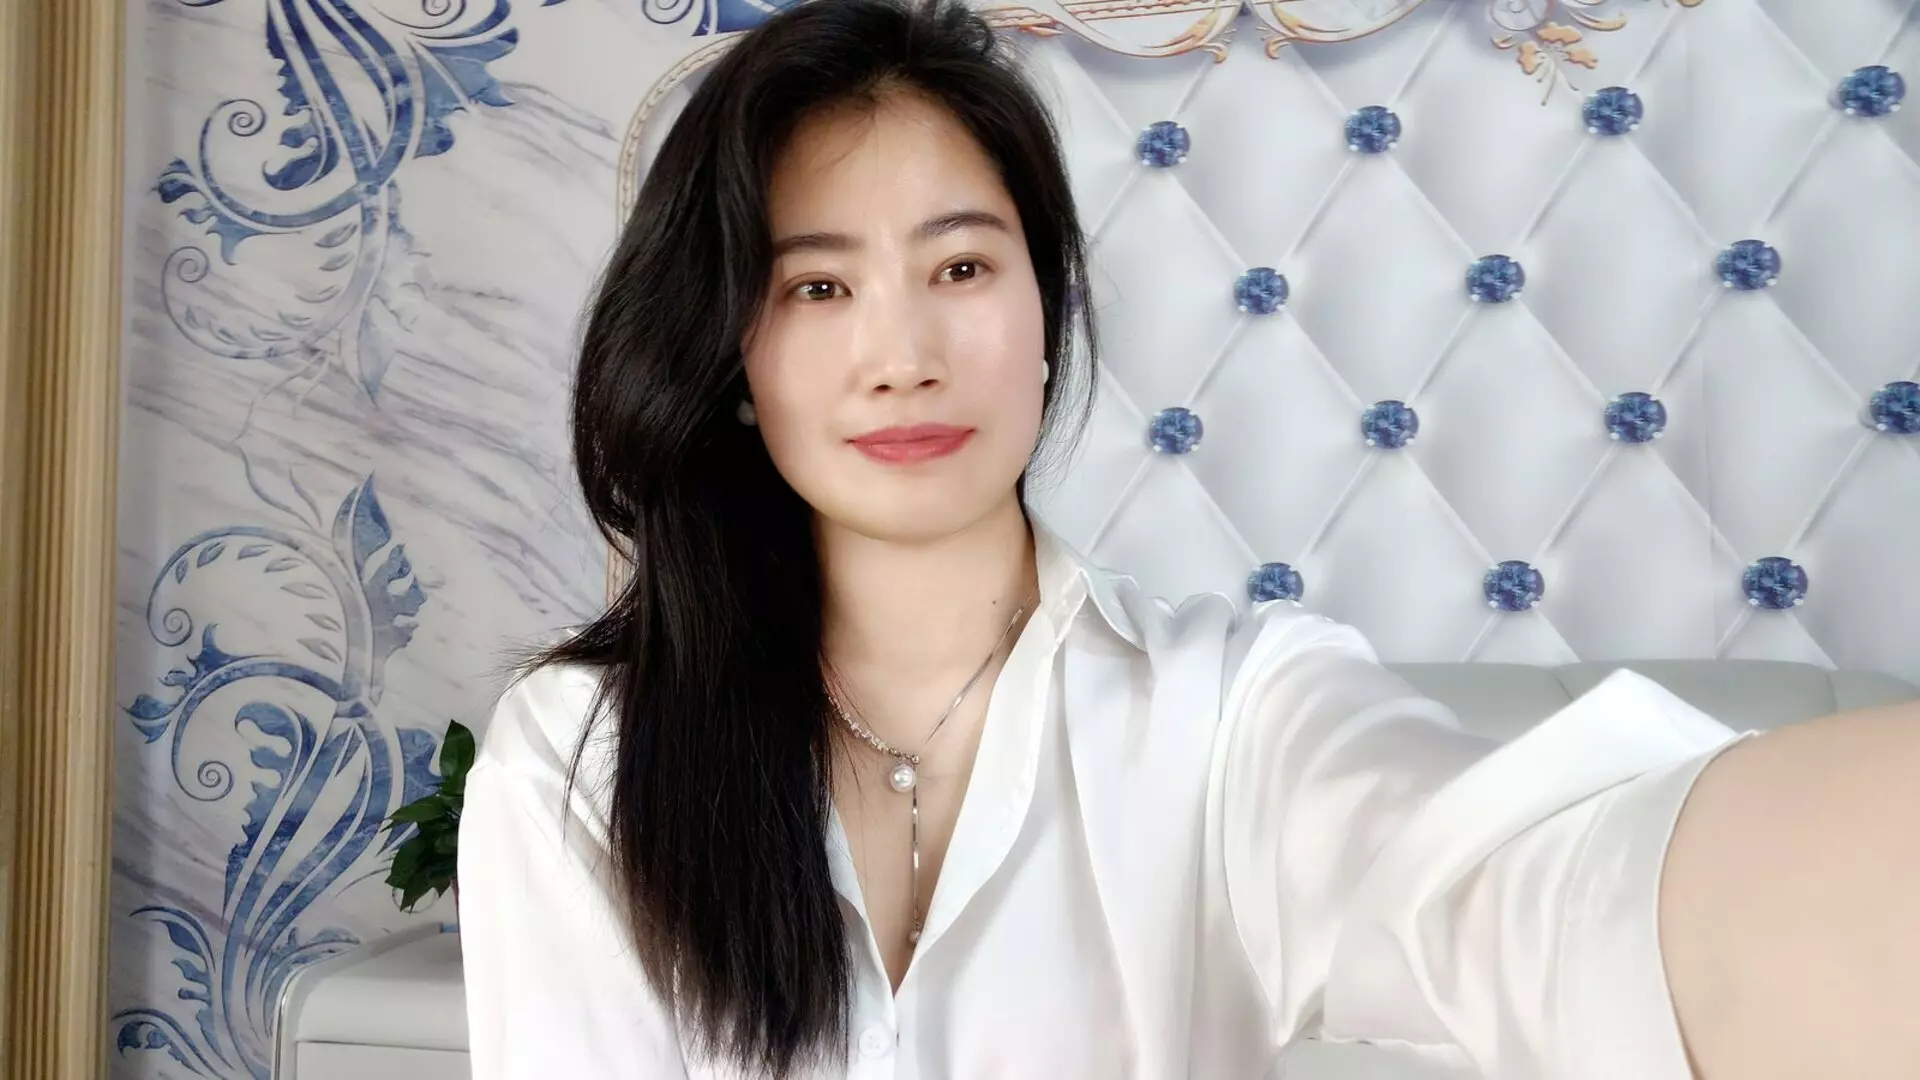 Join DaisyFeng Private Chat